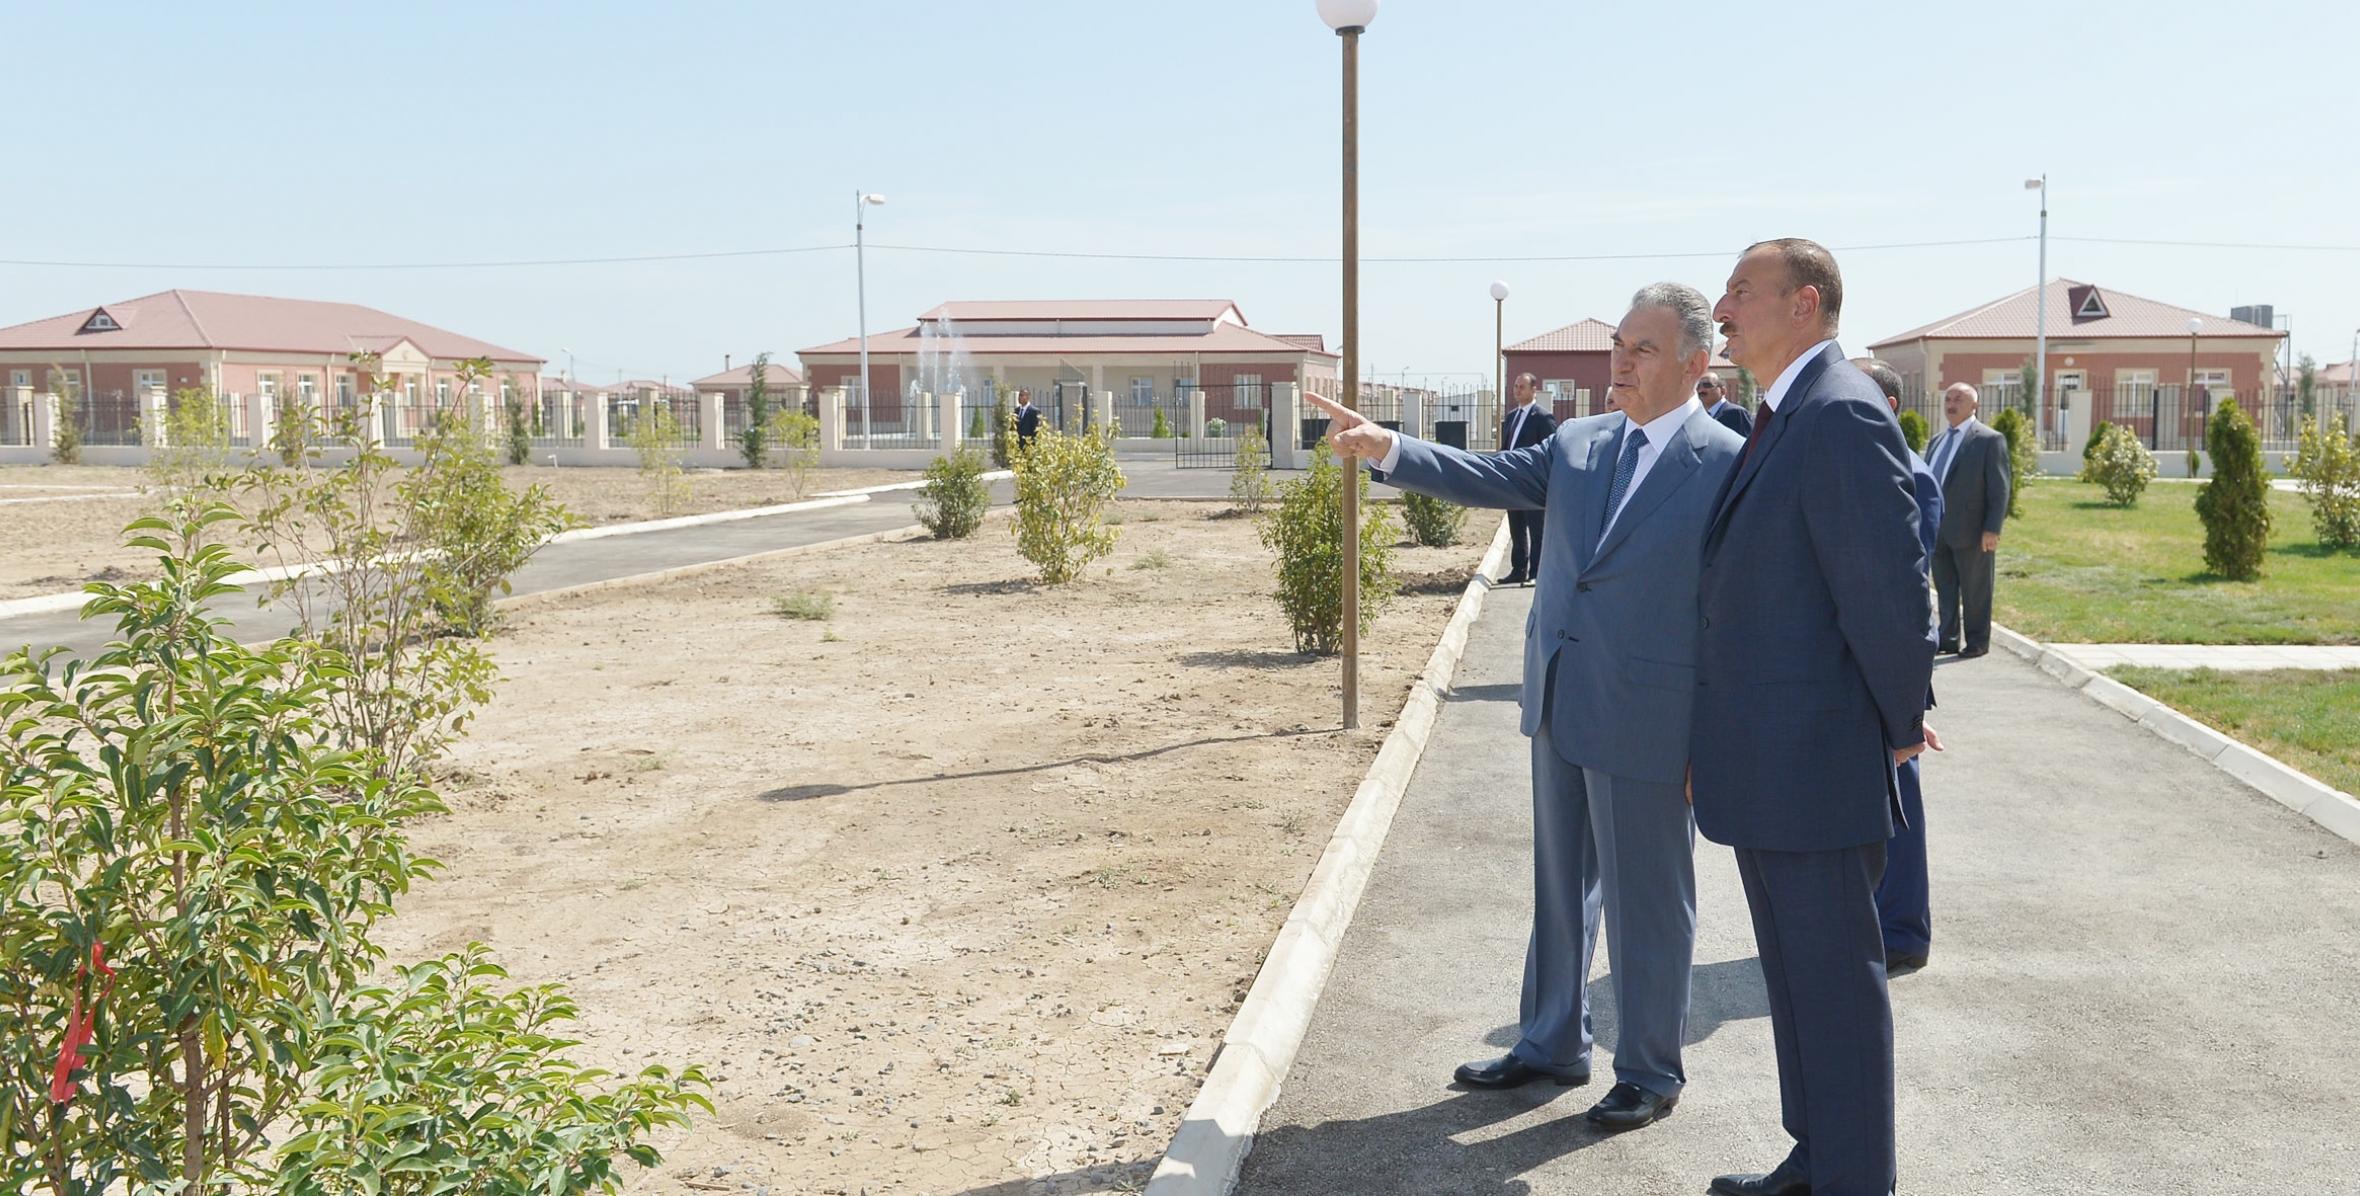 Ilham Aliyev attended the opening of a new settlement for 632 IDP families in Agdam